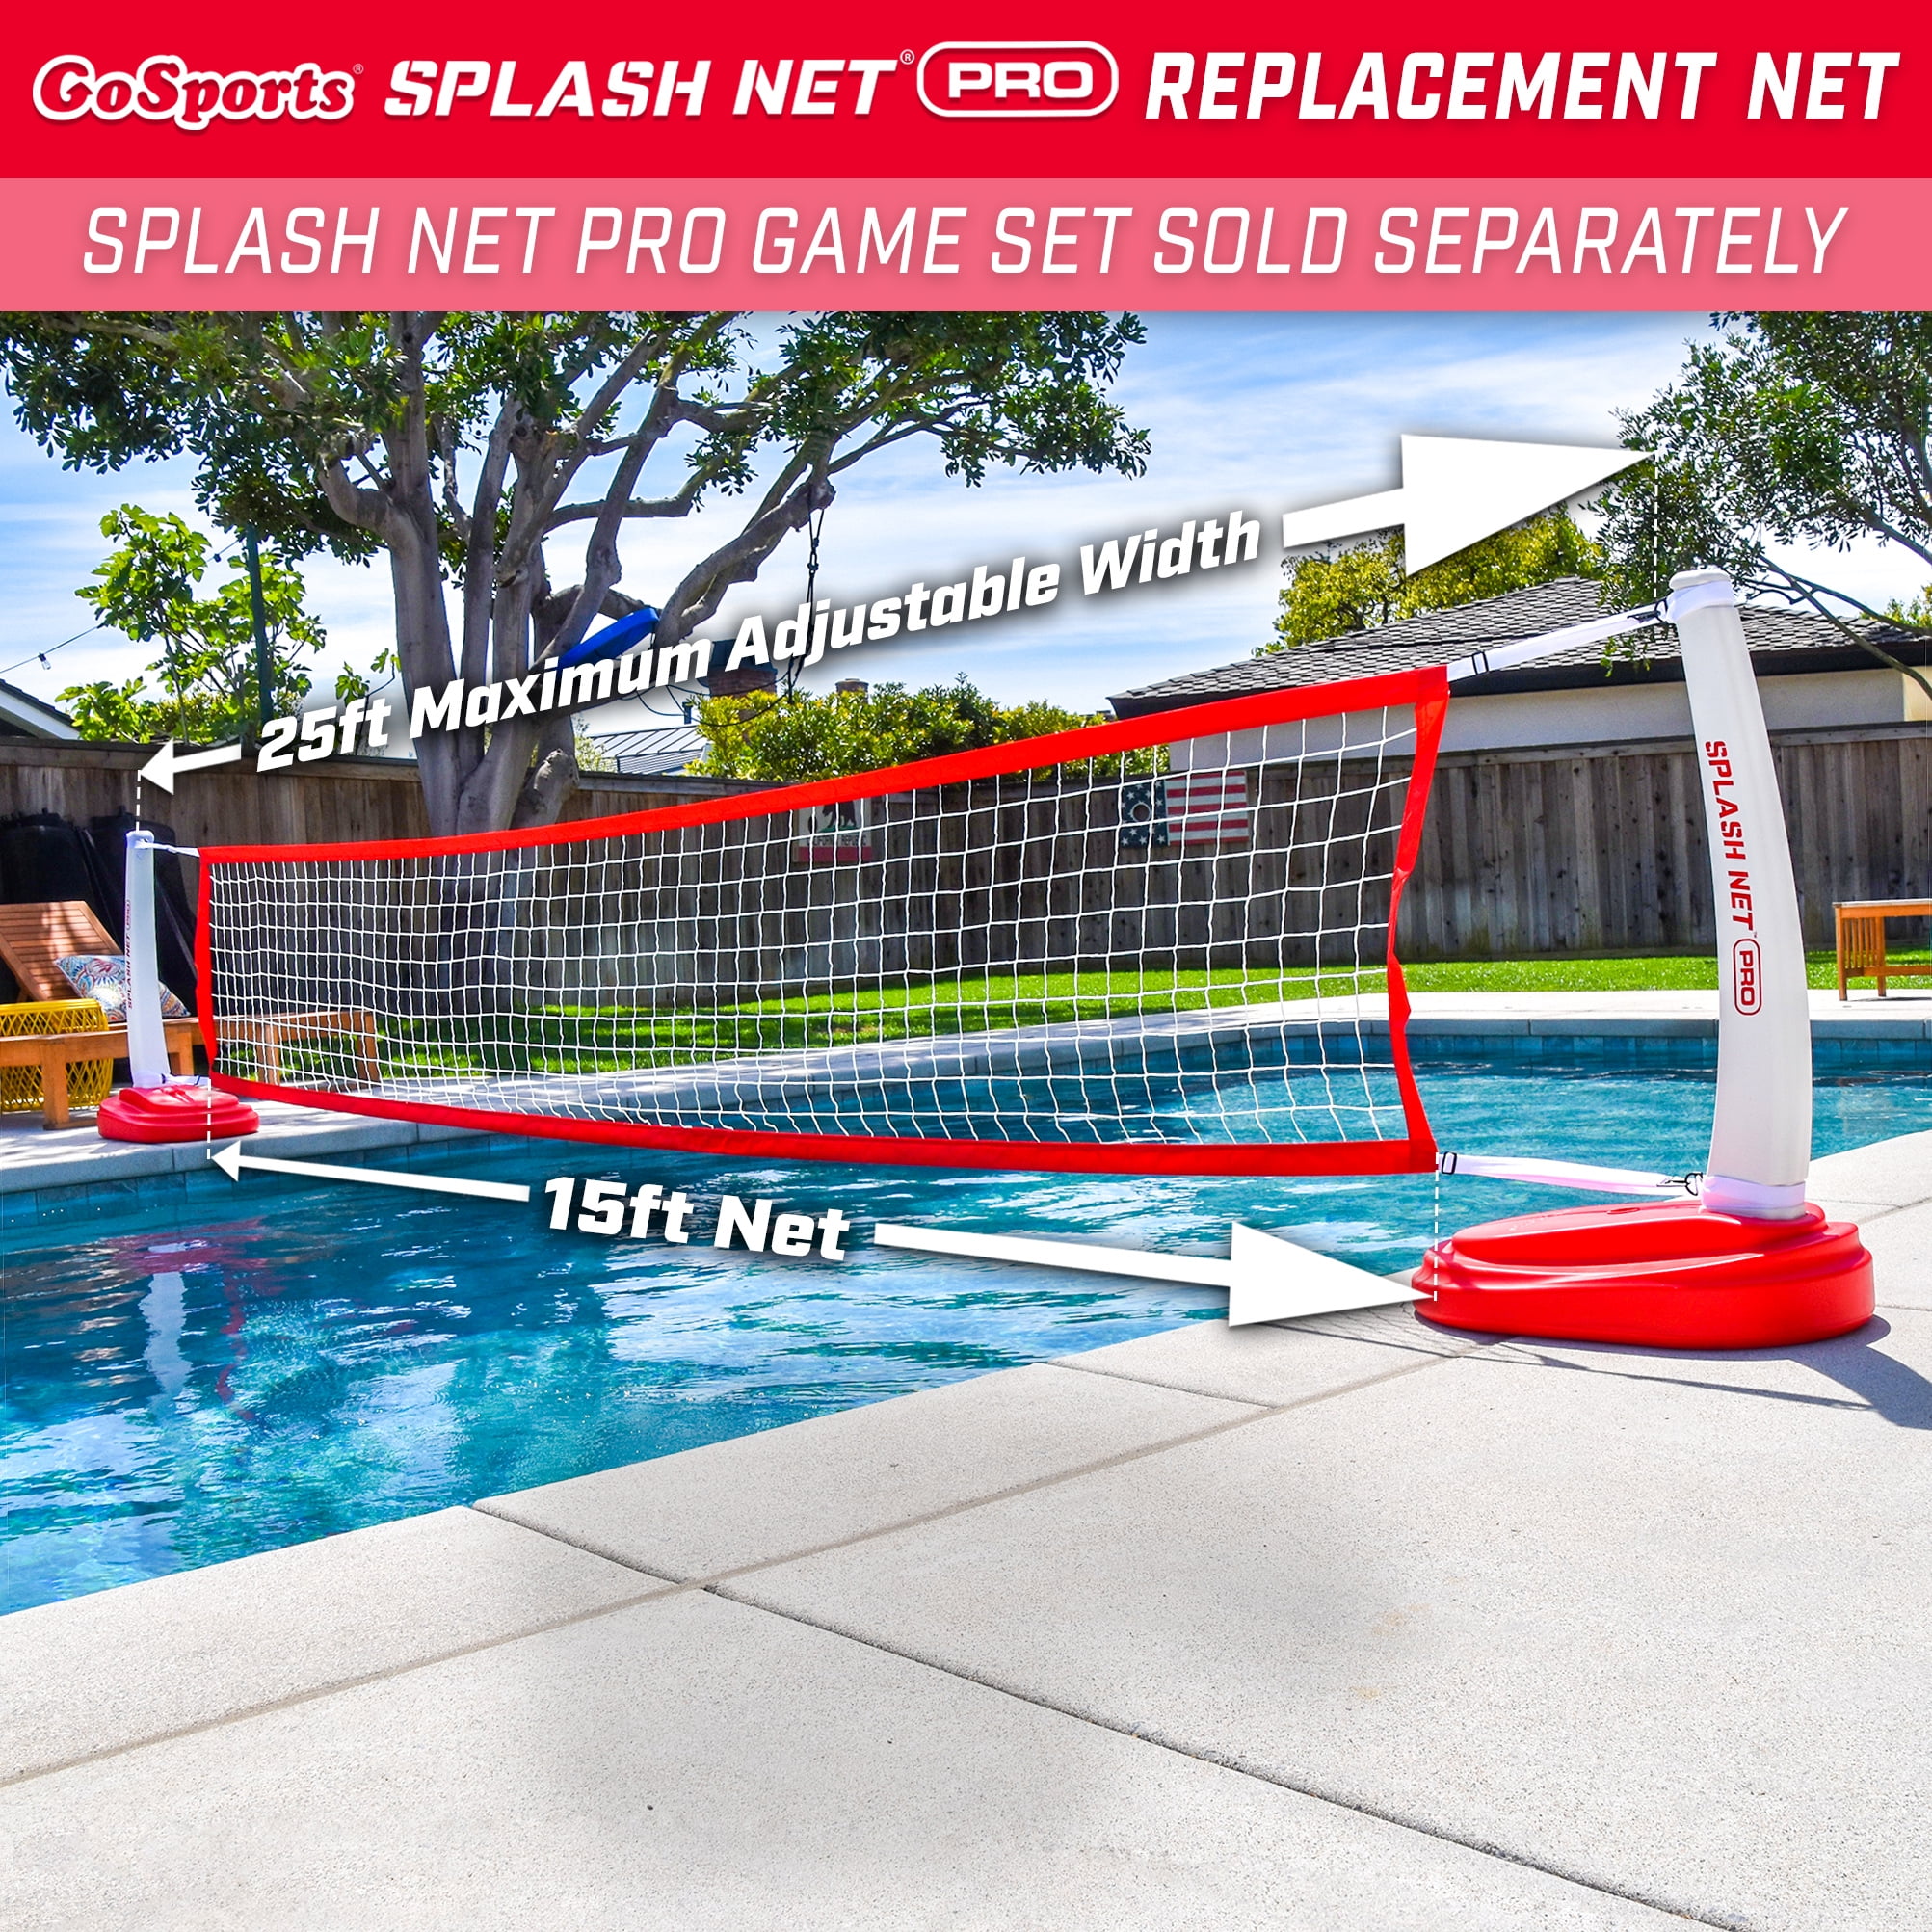 Replacement Net Caro-net Pool Volley Ball Net  17 Ft X 3 Ft W25-58 